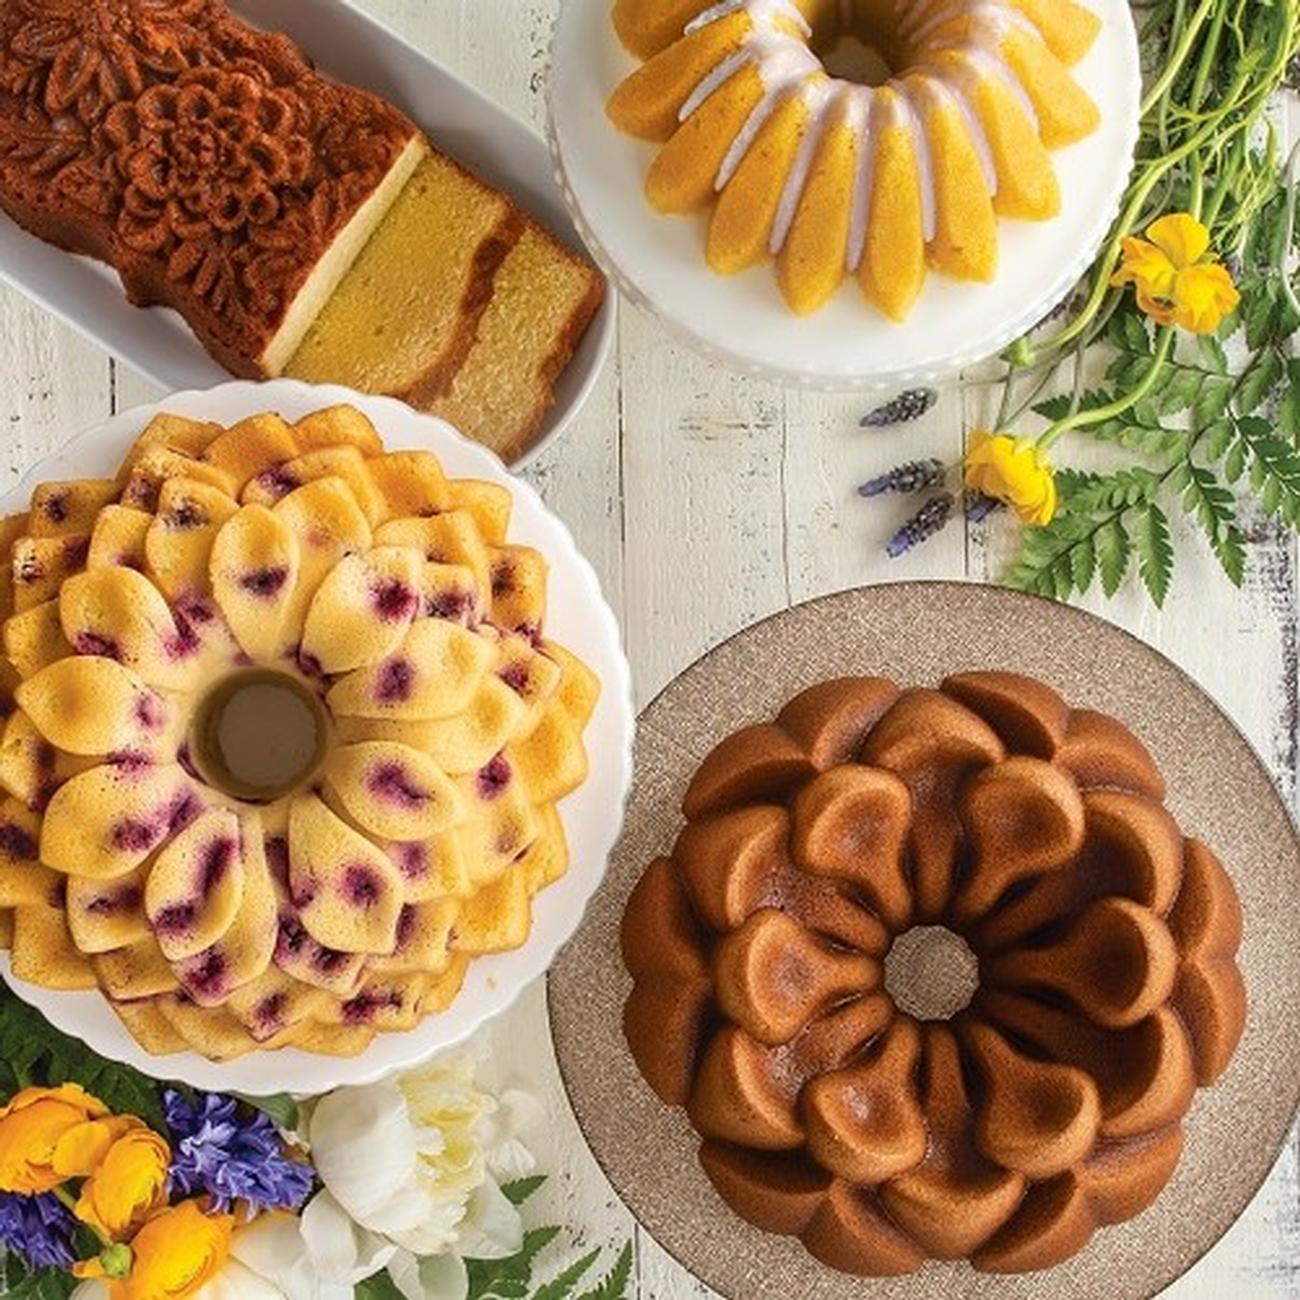 https://www.thekitchenwhisk.ie/contentfiles/productImages/Large/Magnolia-Bundt-Pan-6-Cups-Nordic-Ware-spring-cakes.jpg